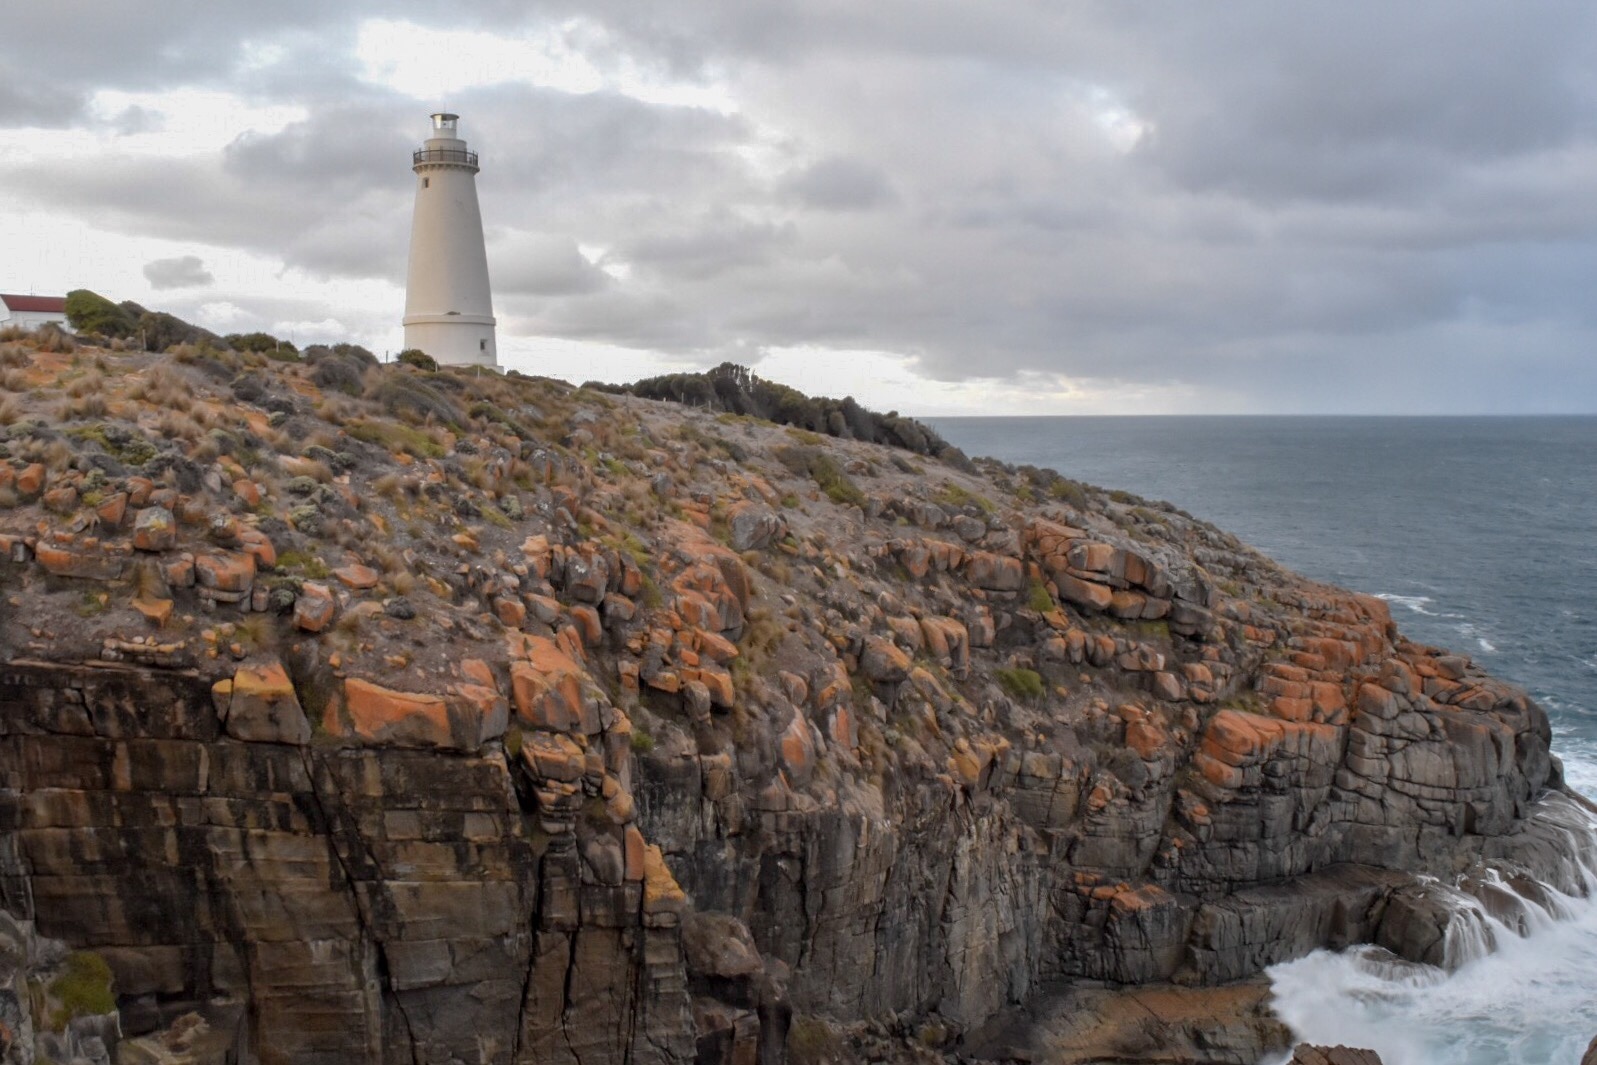 Cape Willoughby lighthouse, the first in South Australia